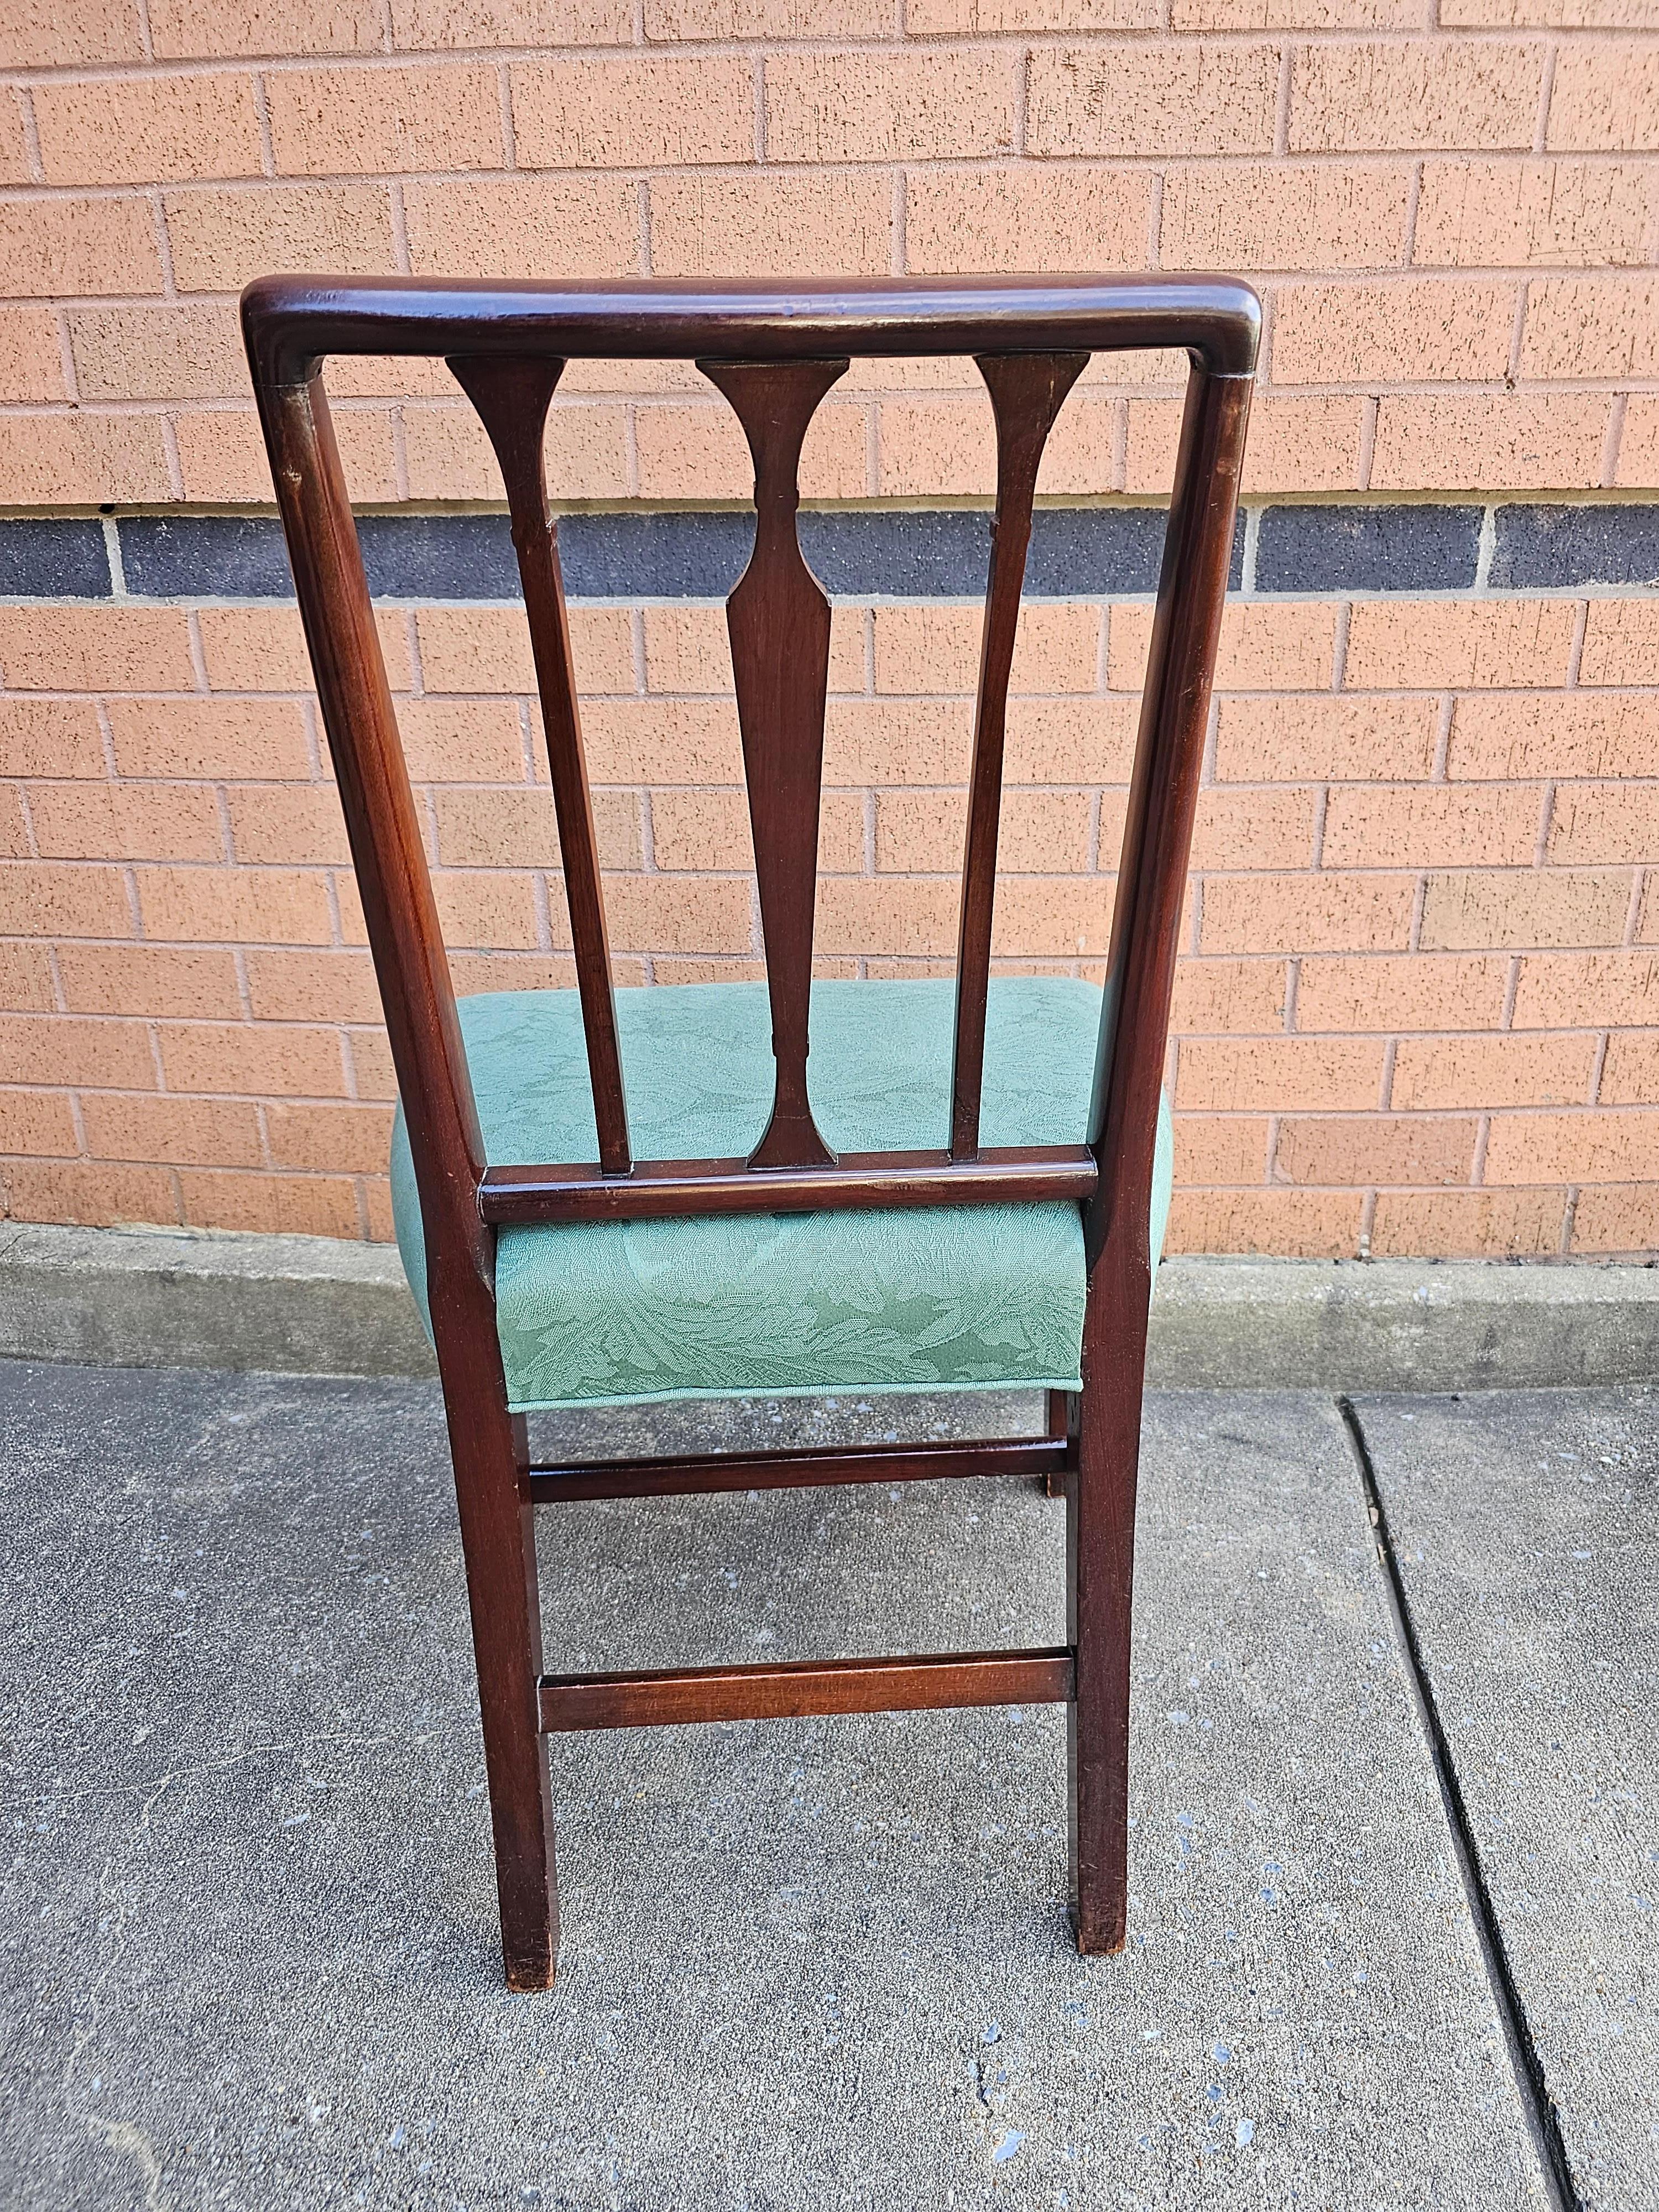 Edwardian Carved Mahogany and Upholstered Seat Side Chair and Foot Stool In Good Condition For Sale In Germantown, MD